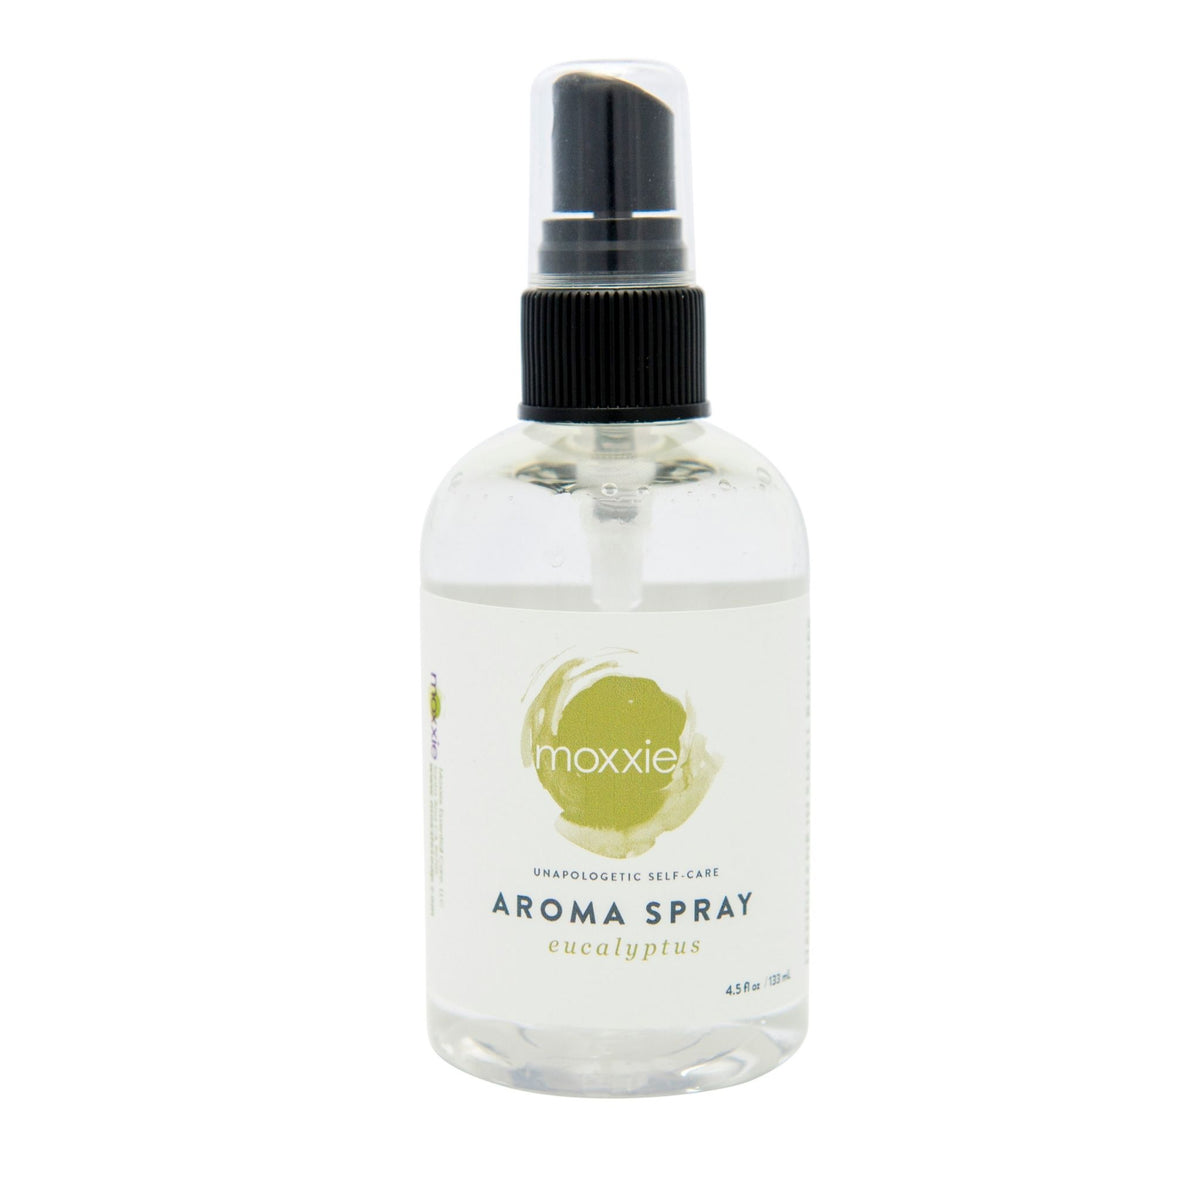 Moxxie's all natural essential oil room and body aroma spray